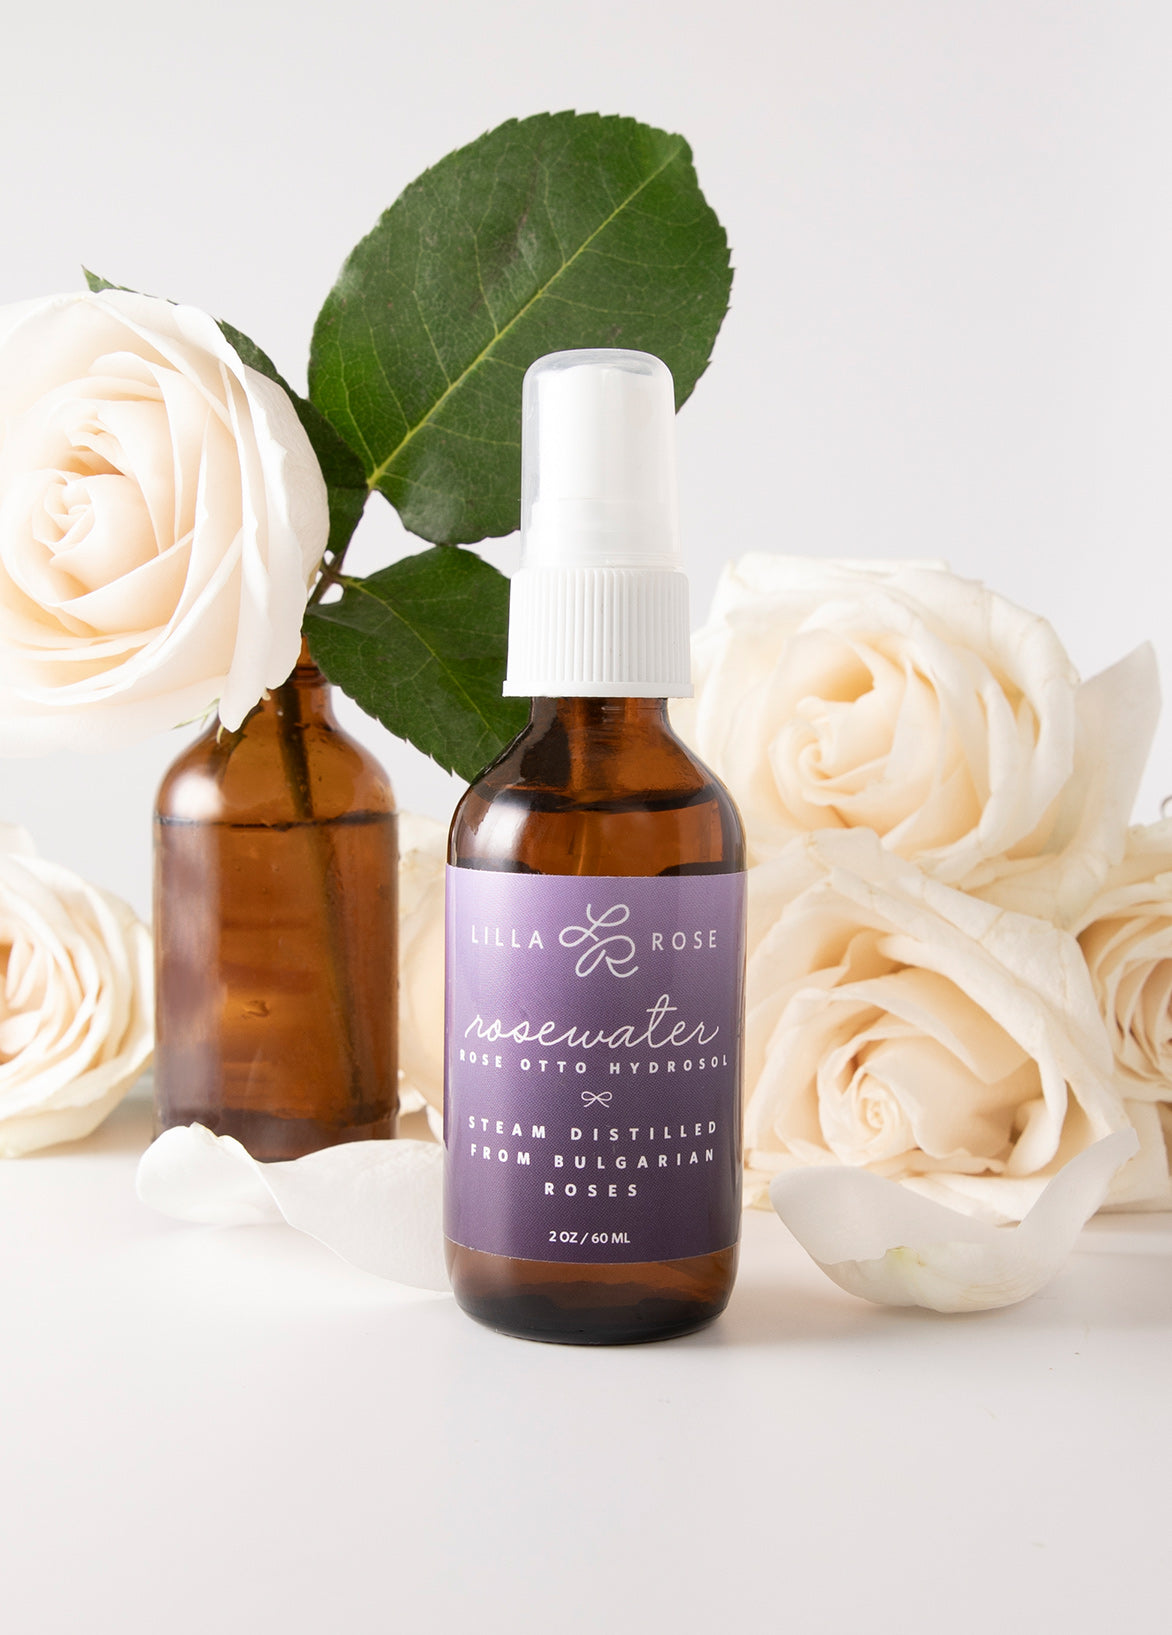 Rosewater in an amber glass bottle with purple lilla Rose label in front of white roses 